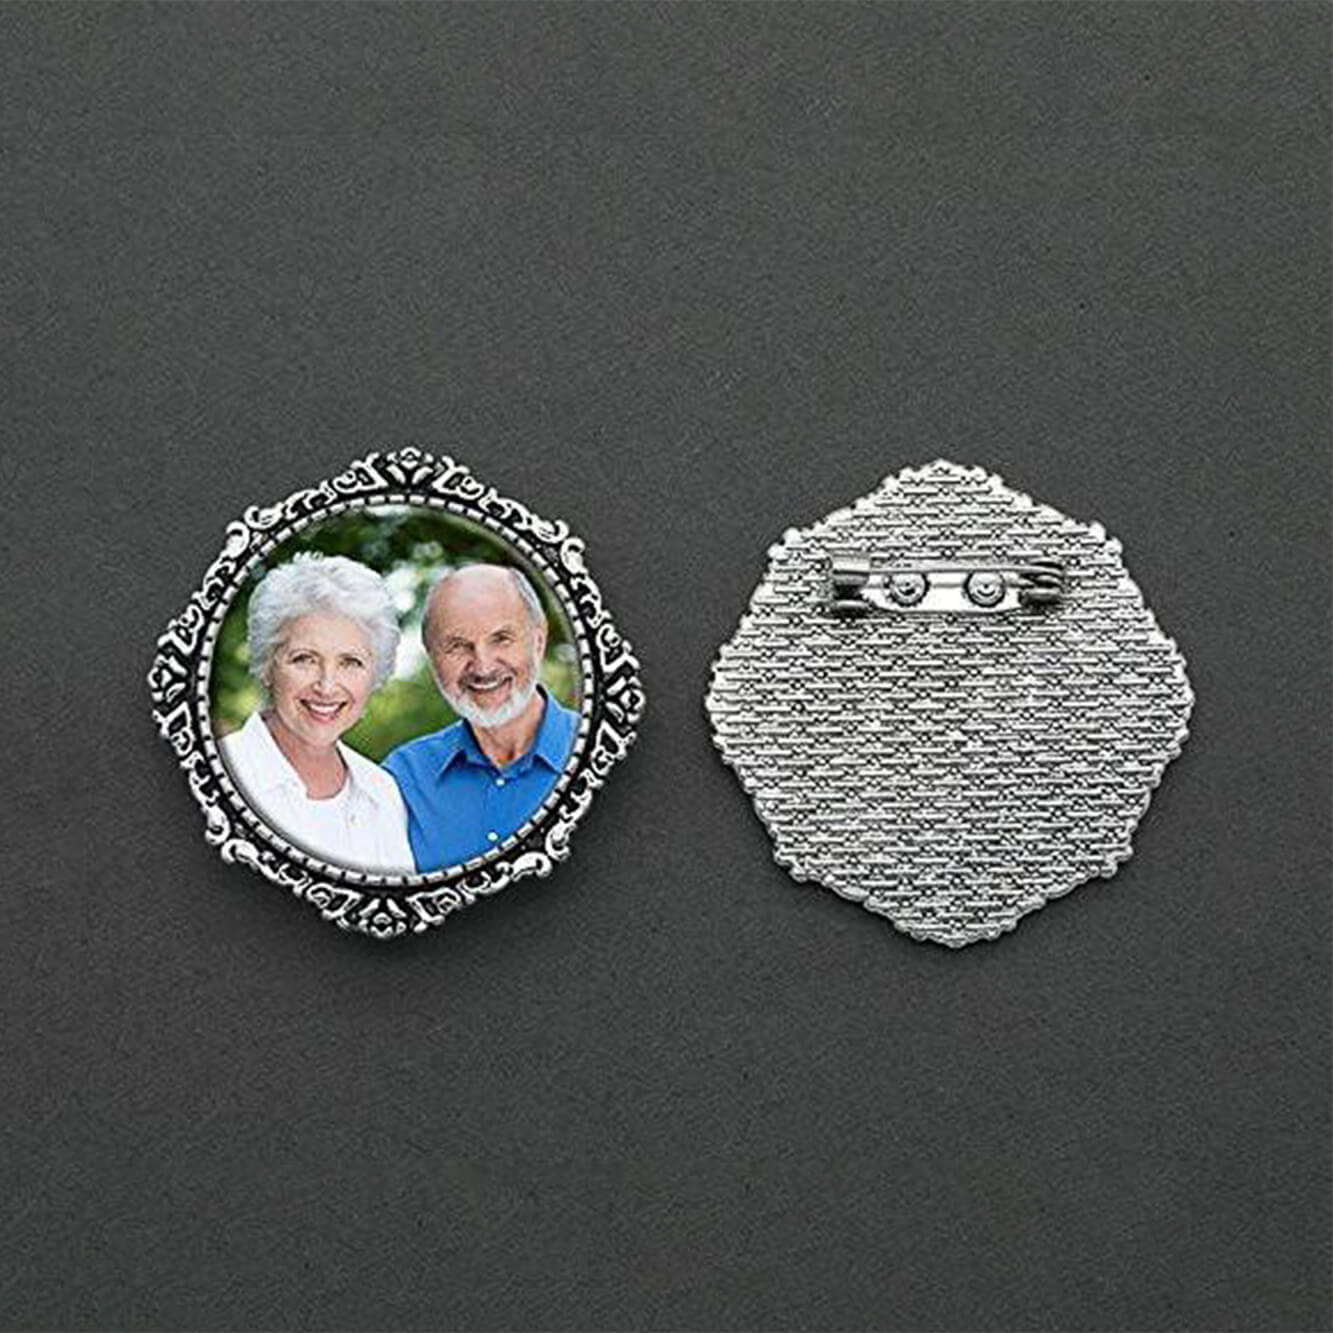 A memorial brooch or memorial pin in the design called Lace showing a photo of a grandfather and grandmother, with the back of the pin showing the closure next to it. The pin is show on a neutral black background and is intended to be pinned to a wedding bouquet or wedding jacket to include a deceased relative on your wedding day.